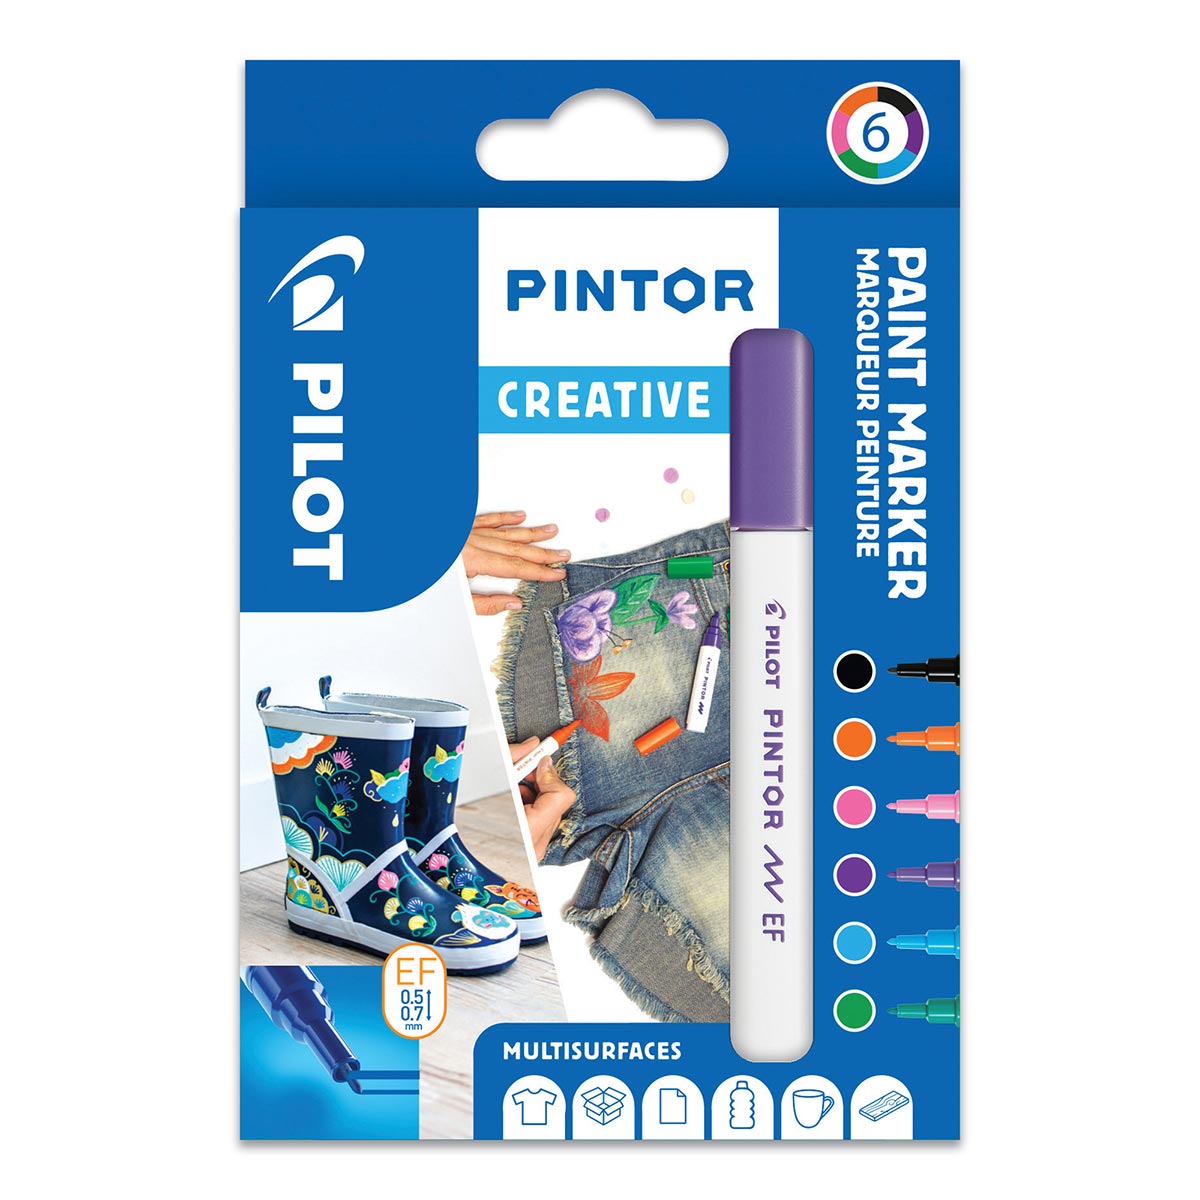 Pintor - Paint Marker Extra Fine Tip 6 Pack - Creative